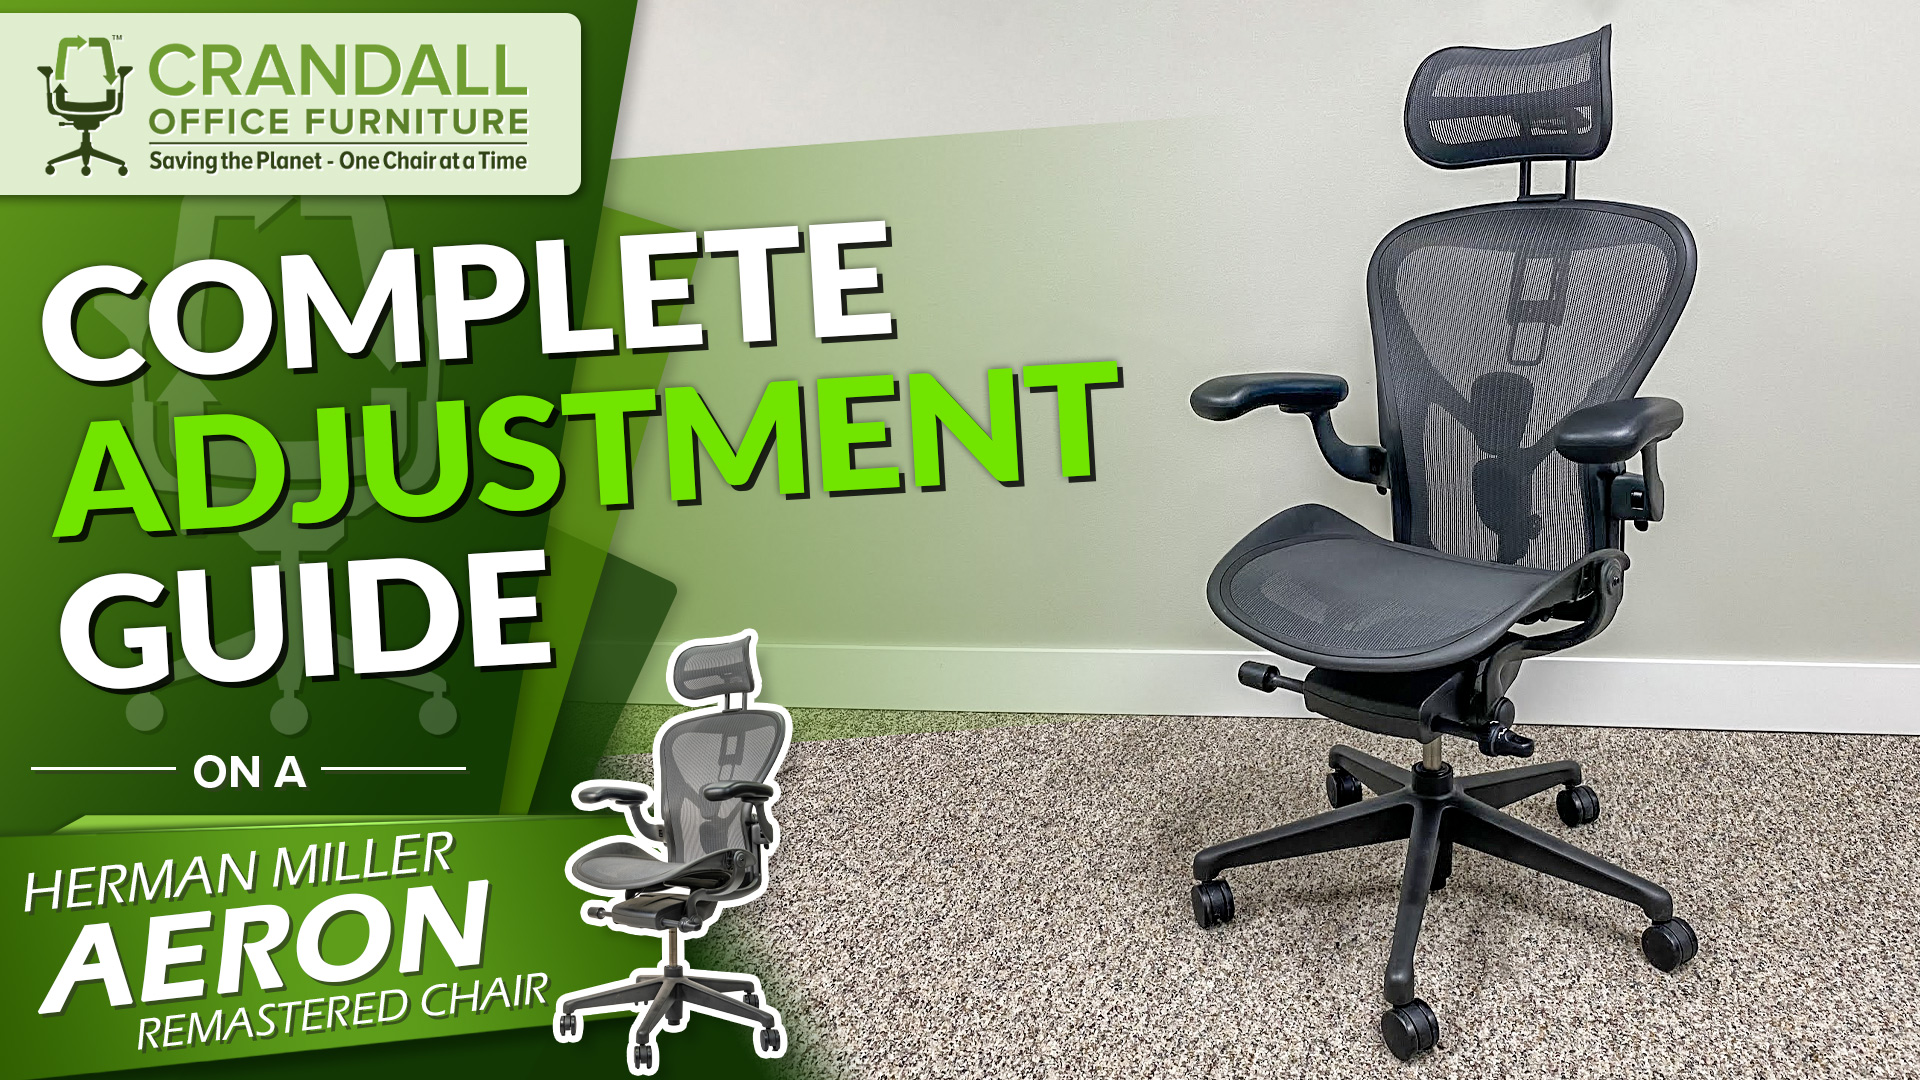 Complete Adjustment Guide The Herman Miller Aeron Remastered Chair - Crandall Furniture